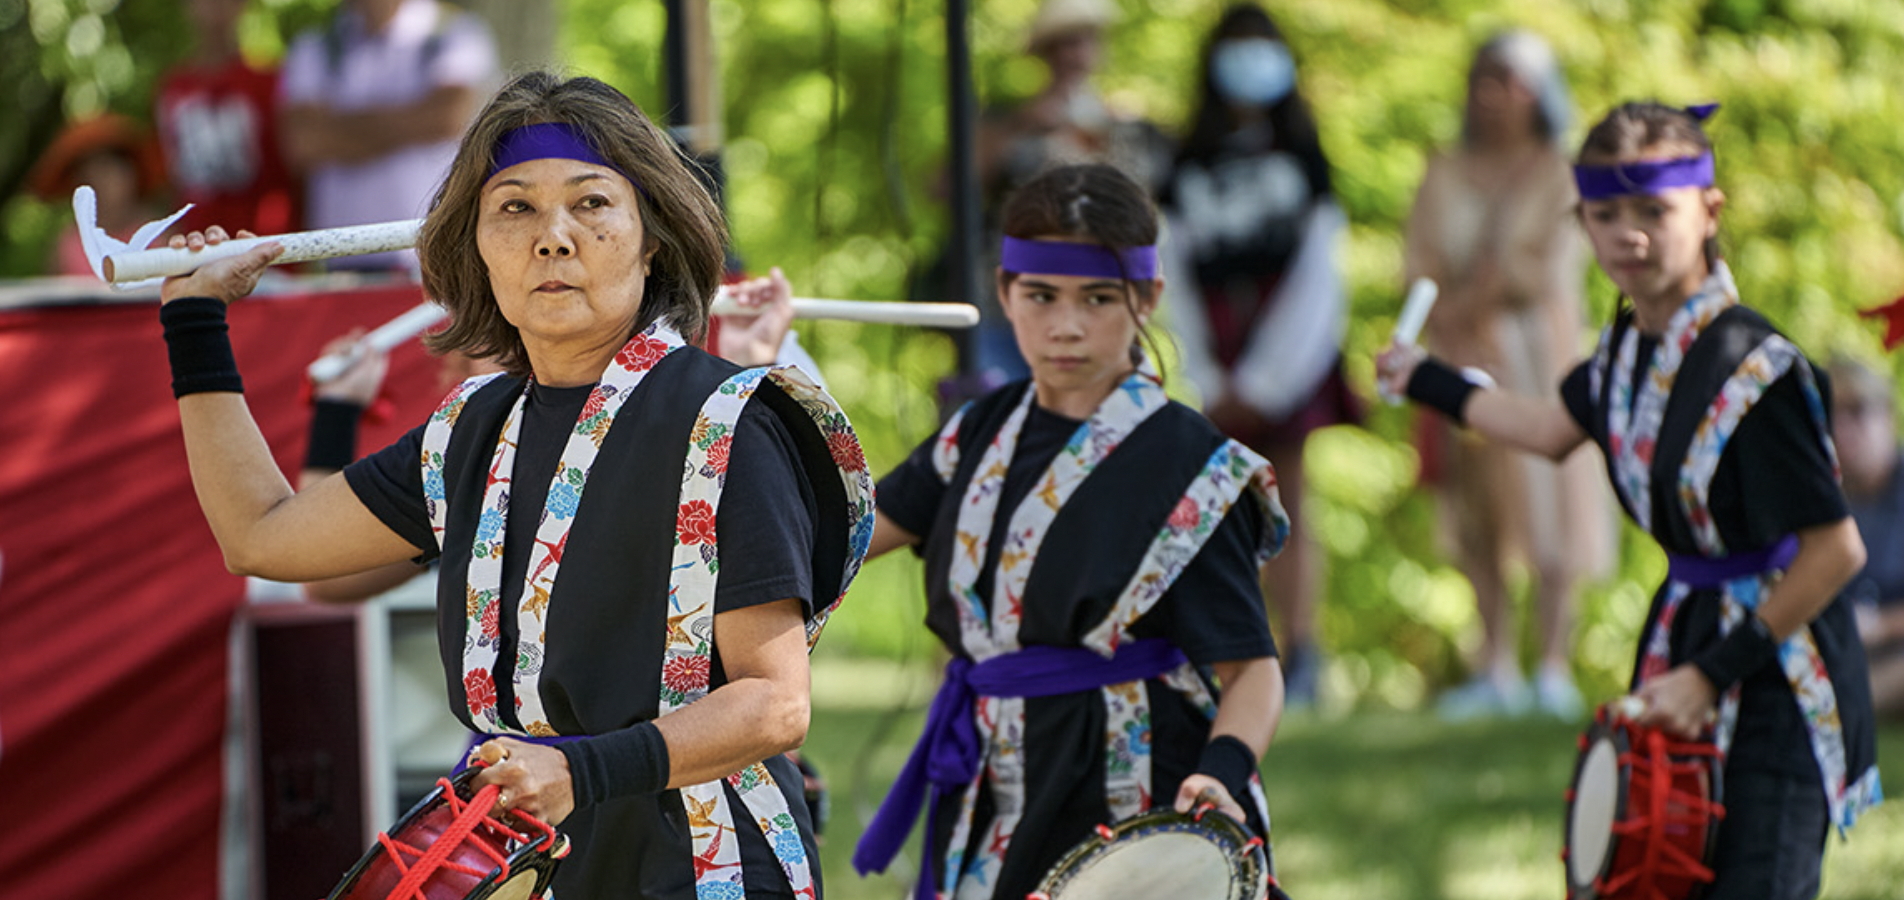 Japanese Festival Tickets | September 3–5, 2022 | 9 a.m. to 8 p.m. Saturday and Sunday, 9 a.m. to 5 p.m. Monday